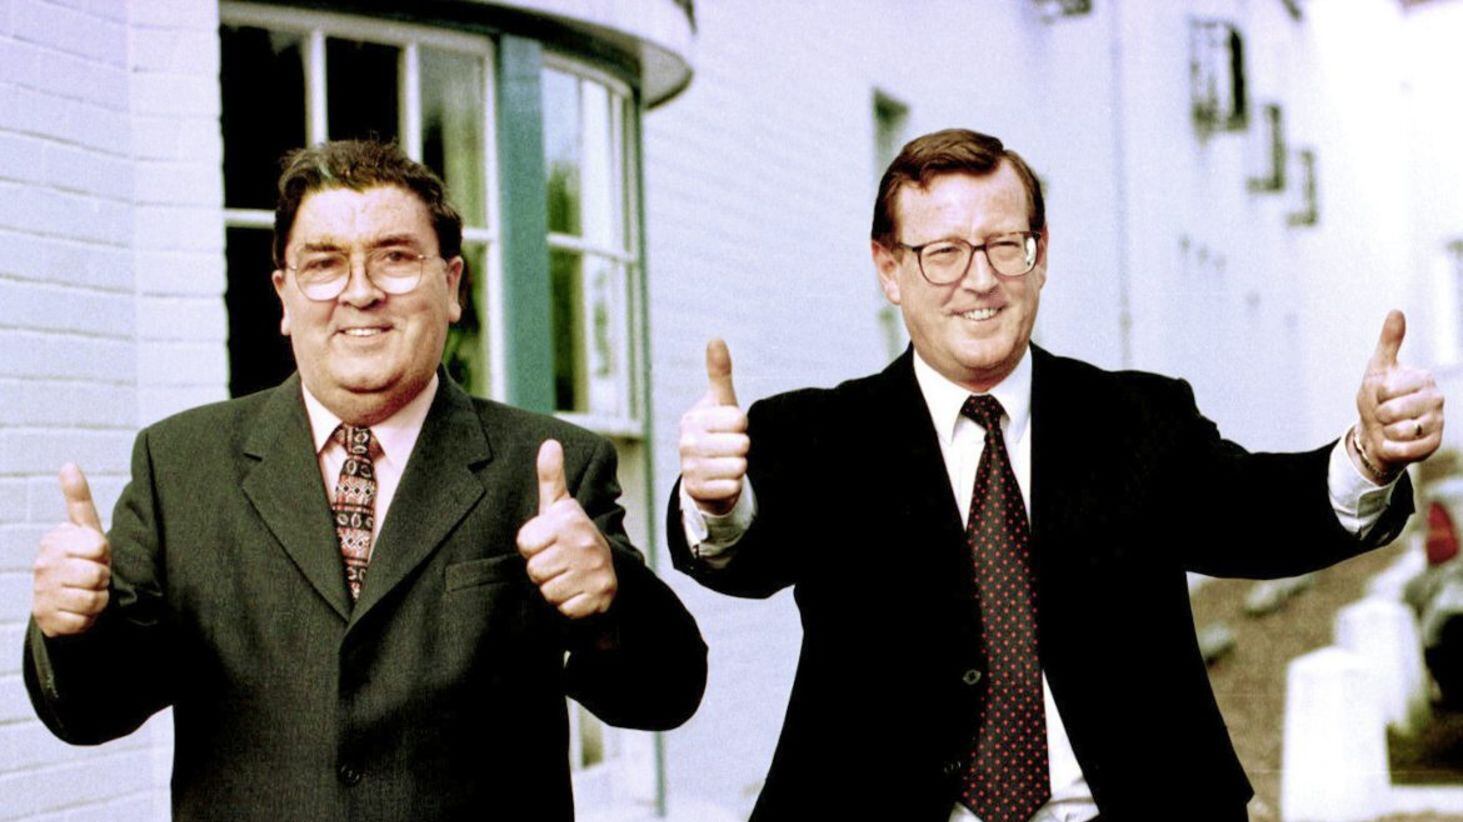 John Hume and David Trimble received the Nobel Peace Prize jointly for their work which lead to the signing of the Belfast Agreement 